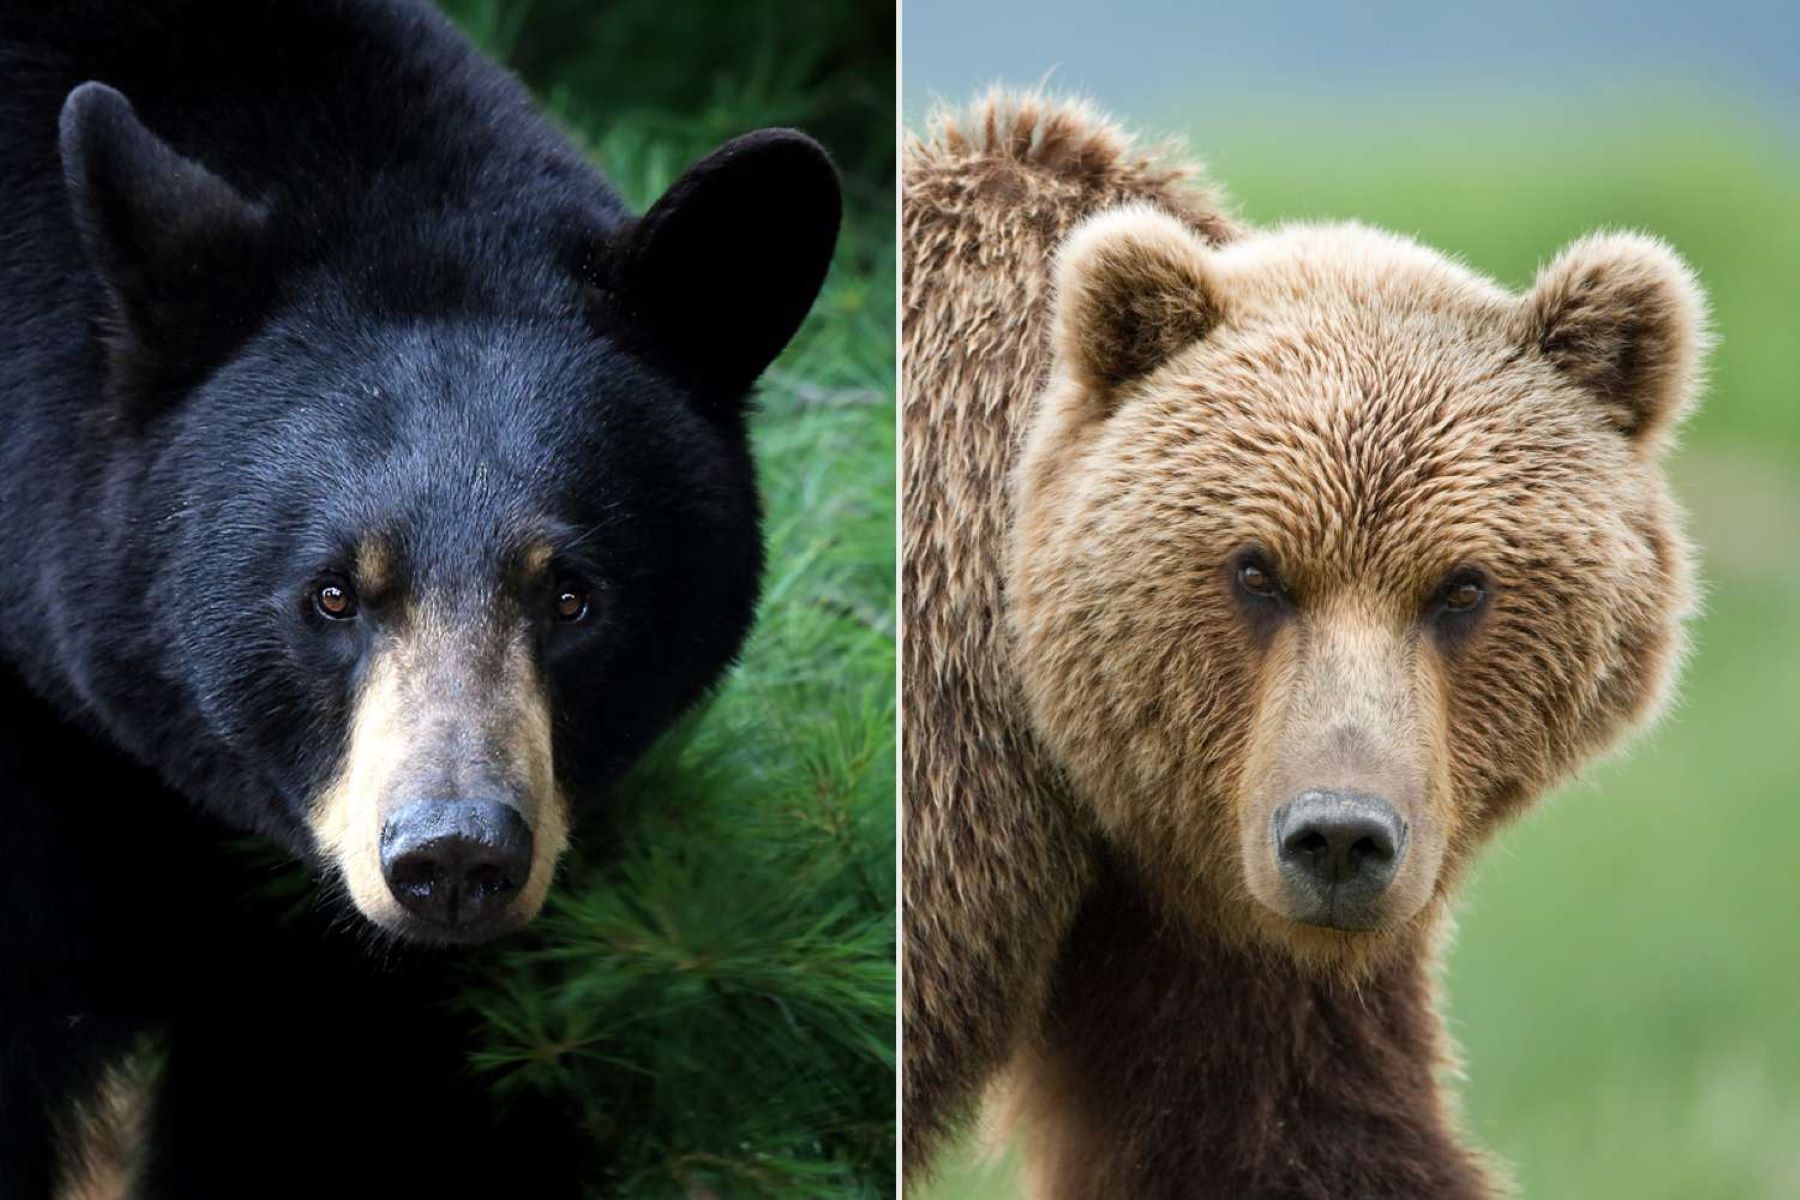 Shocking Truth: Black Bears Vs Grizzly Bears - Who's More Dangerous To Humans?